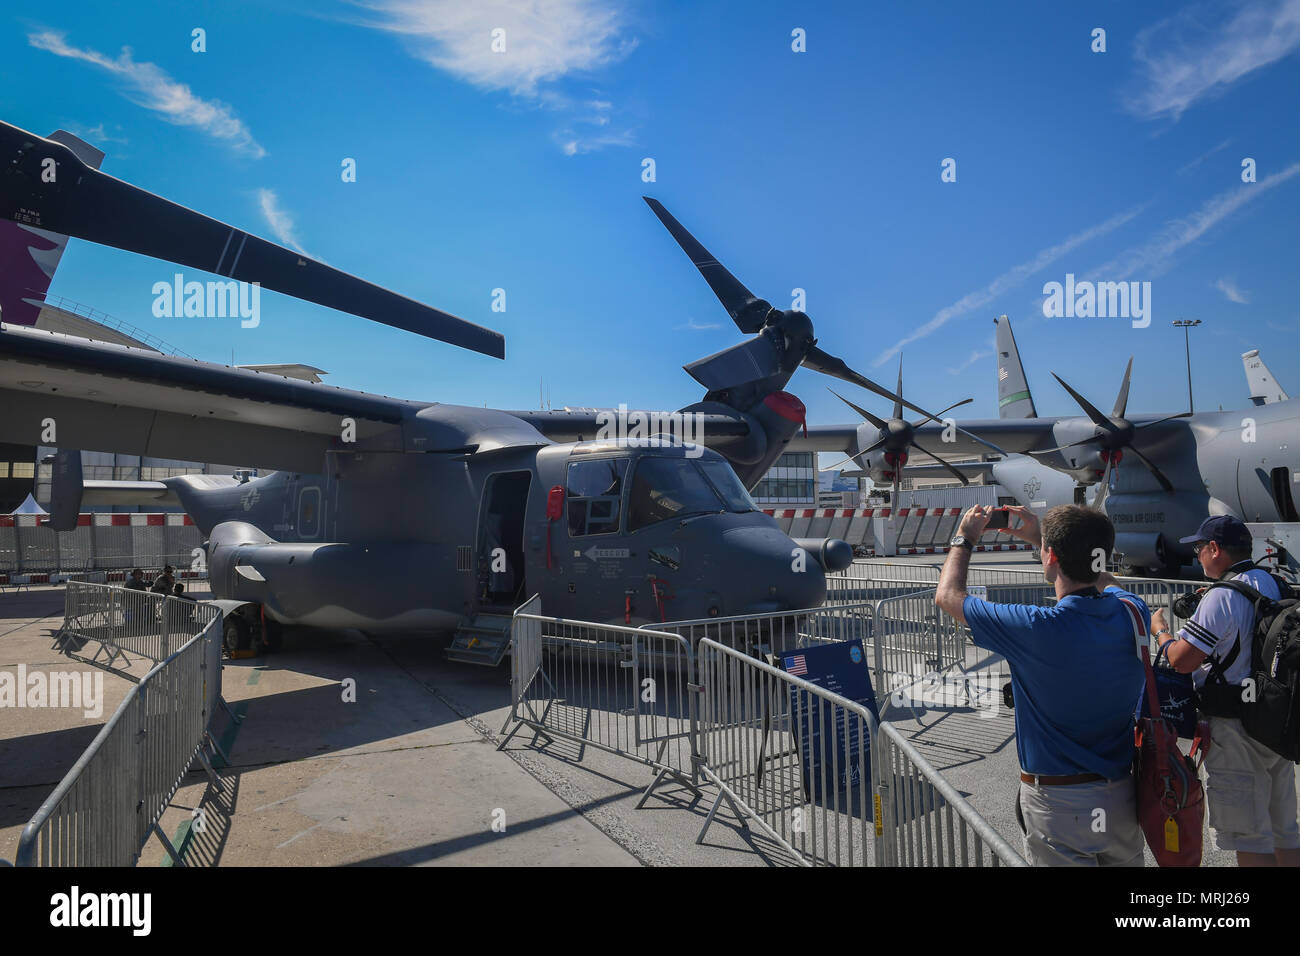 A CV-22 Osprey from the 352nd Special Operations Wing, Royal Air Force Mildenhall, is displayed in the U.S. corral at the Paris Air Show June 20, 2017 at Le Bourget, France. Aside from the CV-22, the U.S. is displaying an F-35A Lightning II, an F-16 Fighting Falcon, a CH-47 Chinook, an AH-64 Apache, a P-8 Poseidon, and a C-130J Super Hercules. The Paris Air Show offers the U.S. a unique opportunity to display their leadership in aerospeace and technology on an international scale. (U.S. Air Force photo/ Tech. Sgt. Ryan Crane) Stock Photo